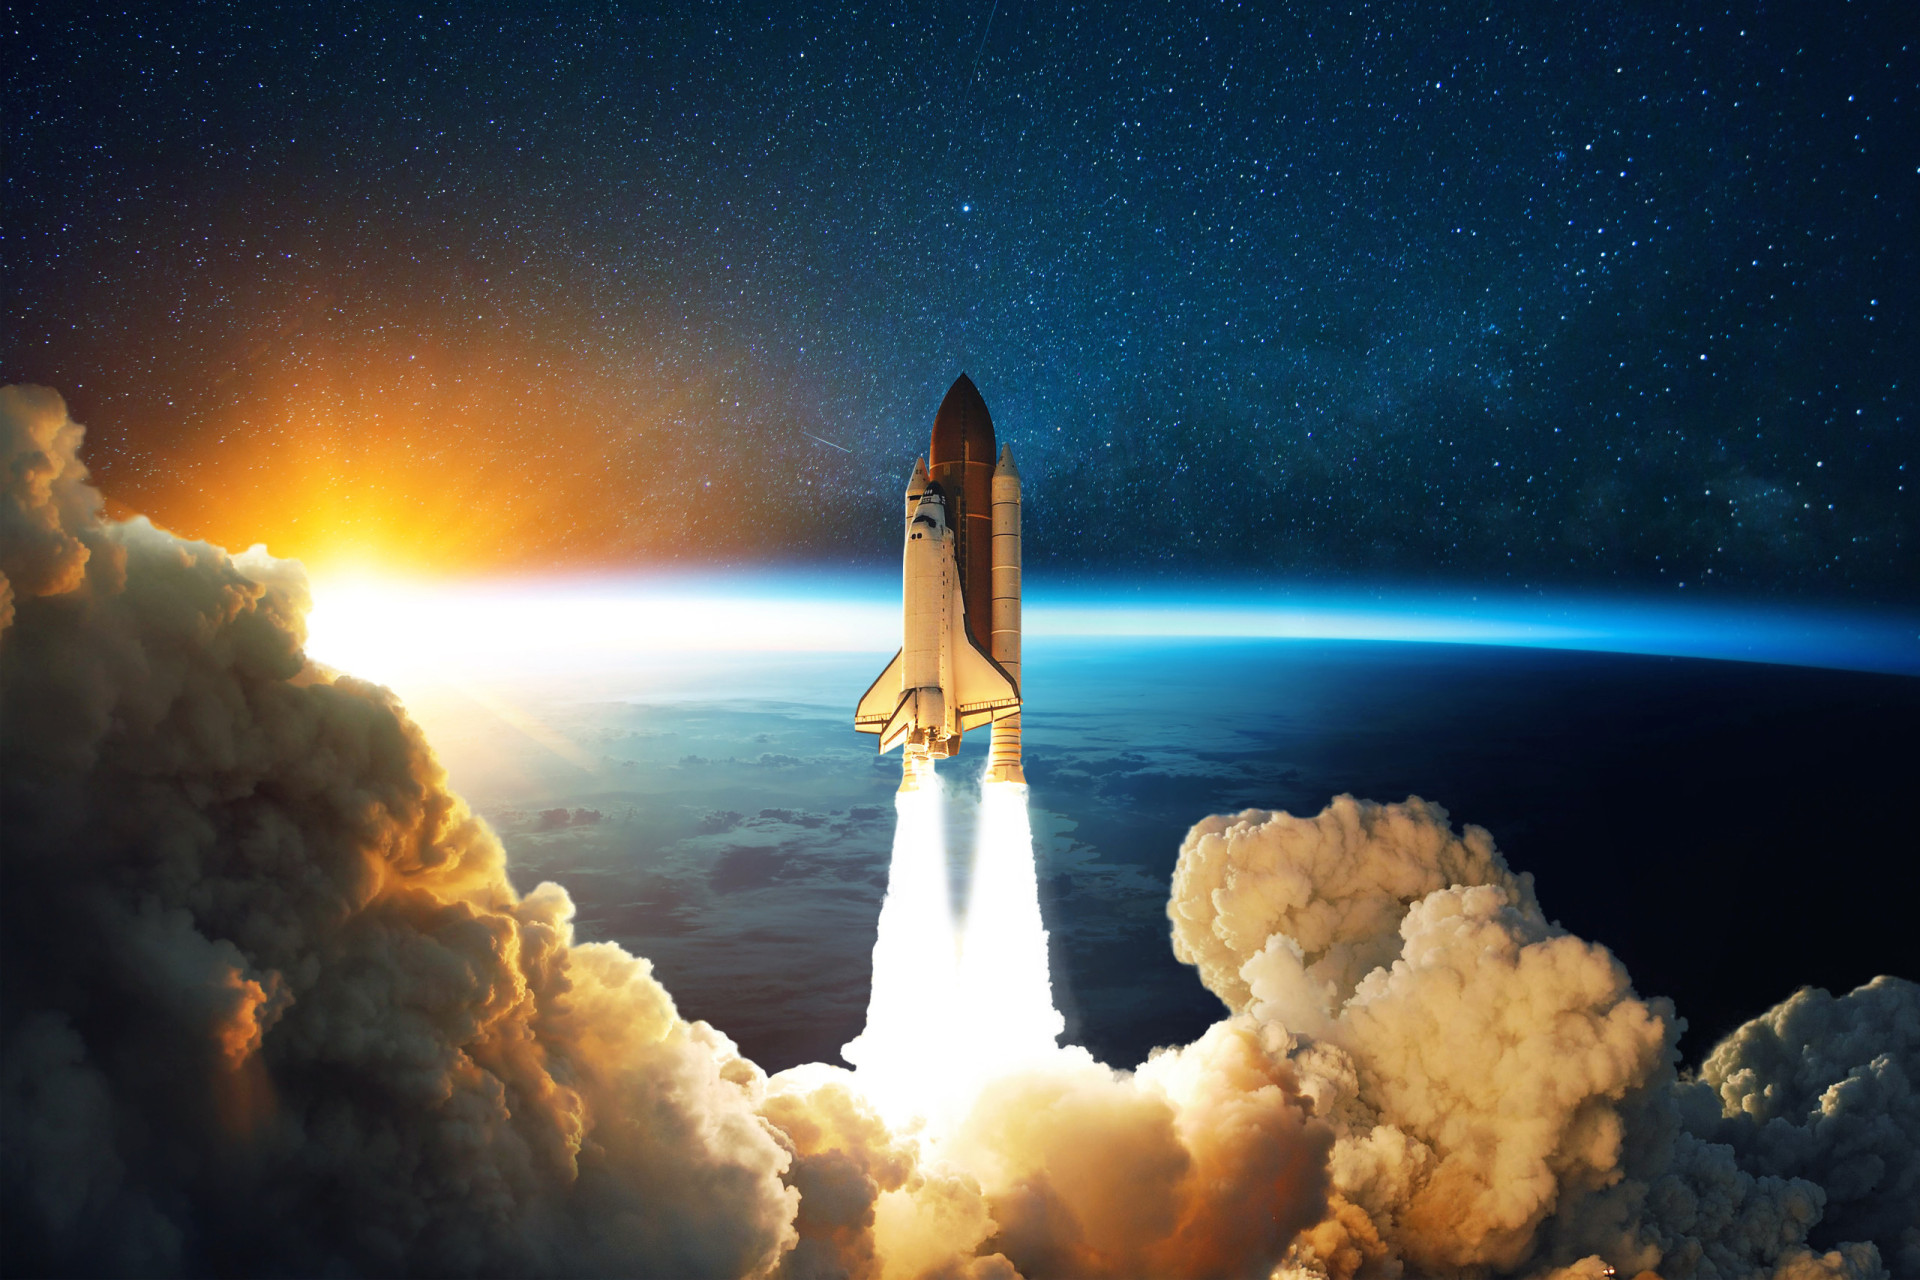 <p>As space <a href="https://www.starsinsider.com/travel/367243/natural-wonders-destroyed-by-tourists" rel="noopener">tourism</a> grows, its environmental impact is under scrutiny. Companies are exploring sustainable rocket fuels and eco-friendly practices to minimize the ecological footprint of space travel.</p><p><a href="https://www.msn.com/en-us/community/channel/vid-7xx8mnucu55yw63we9va2gwr7uihbxwc68fxqp25x6tg4ftibpra?cvid=94631541bc0f4f89bfd59158d696ad7e">Follow us and access great exclusive content every day</a></p>